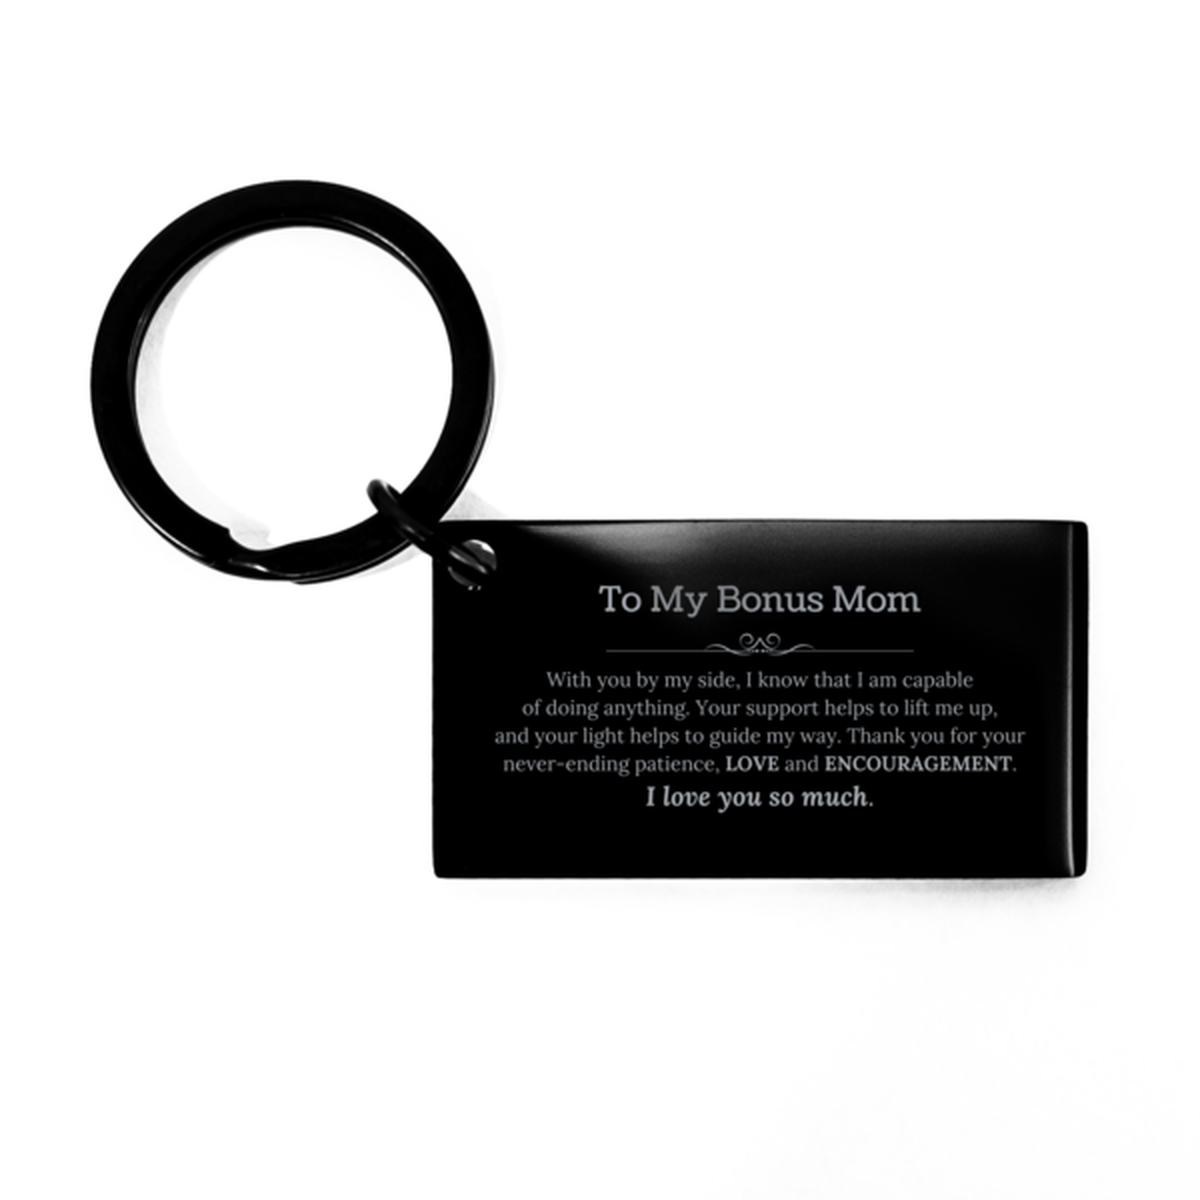 Appreciation Bonus Mom Keychain Gifts, To My Bonus Mom Birthday Christmas Wedding Keepsake Gifts for Bonus Mom With you by my side, I know that I am capable of doing anything. I love you so much